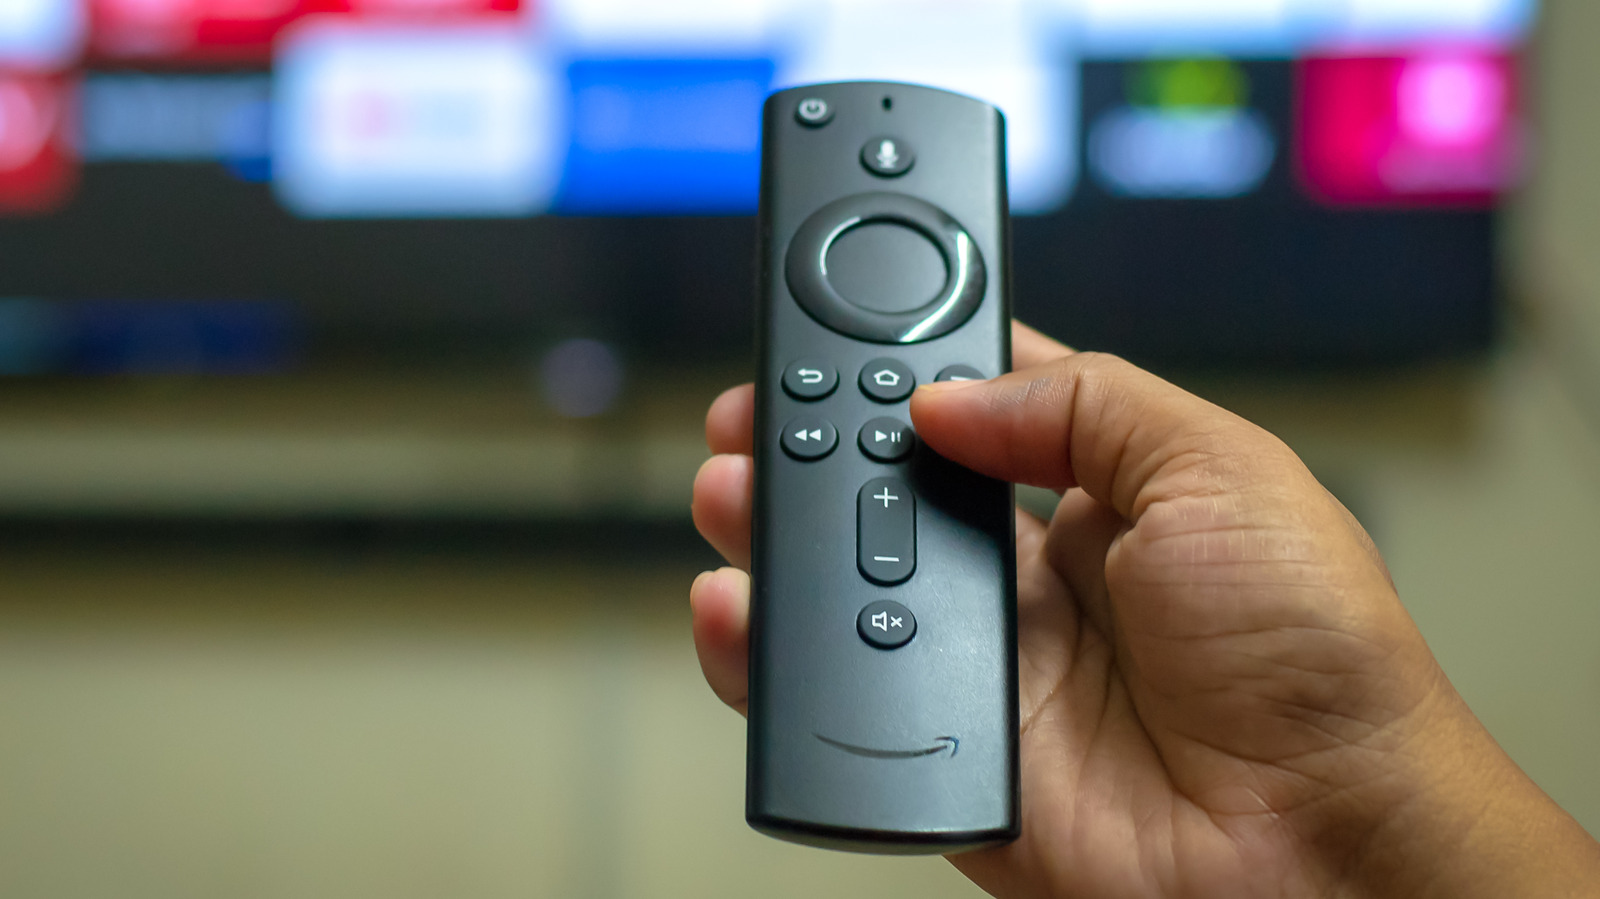 Fire TV Stick: How to cast your phone to your  Fire TV Stick  by Mirroring 